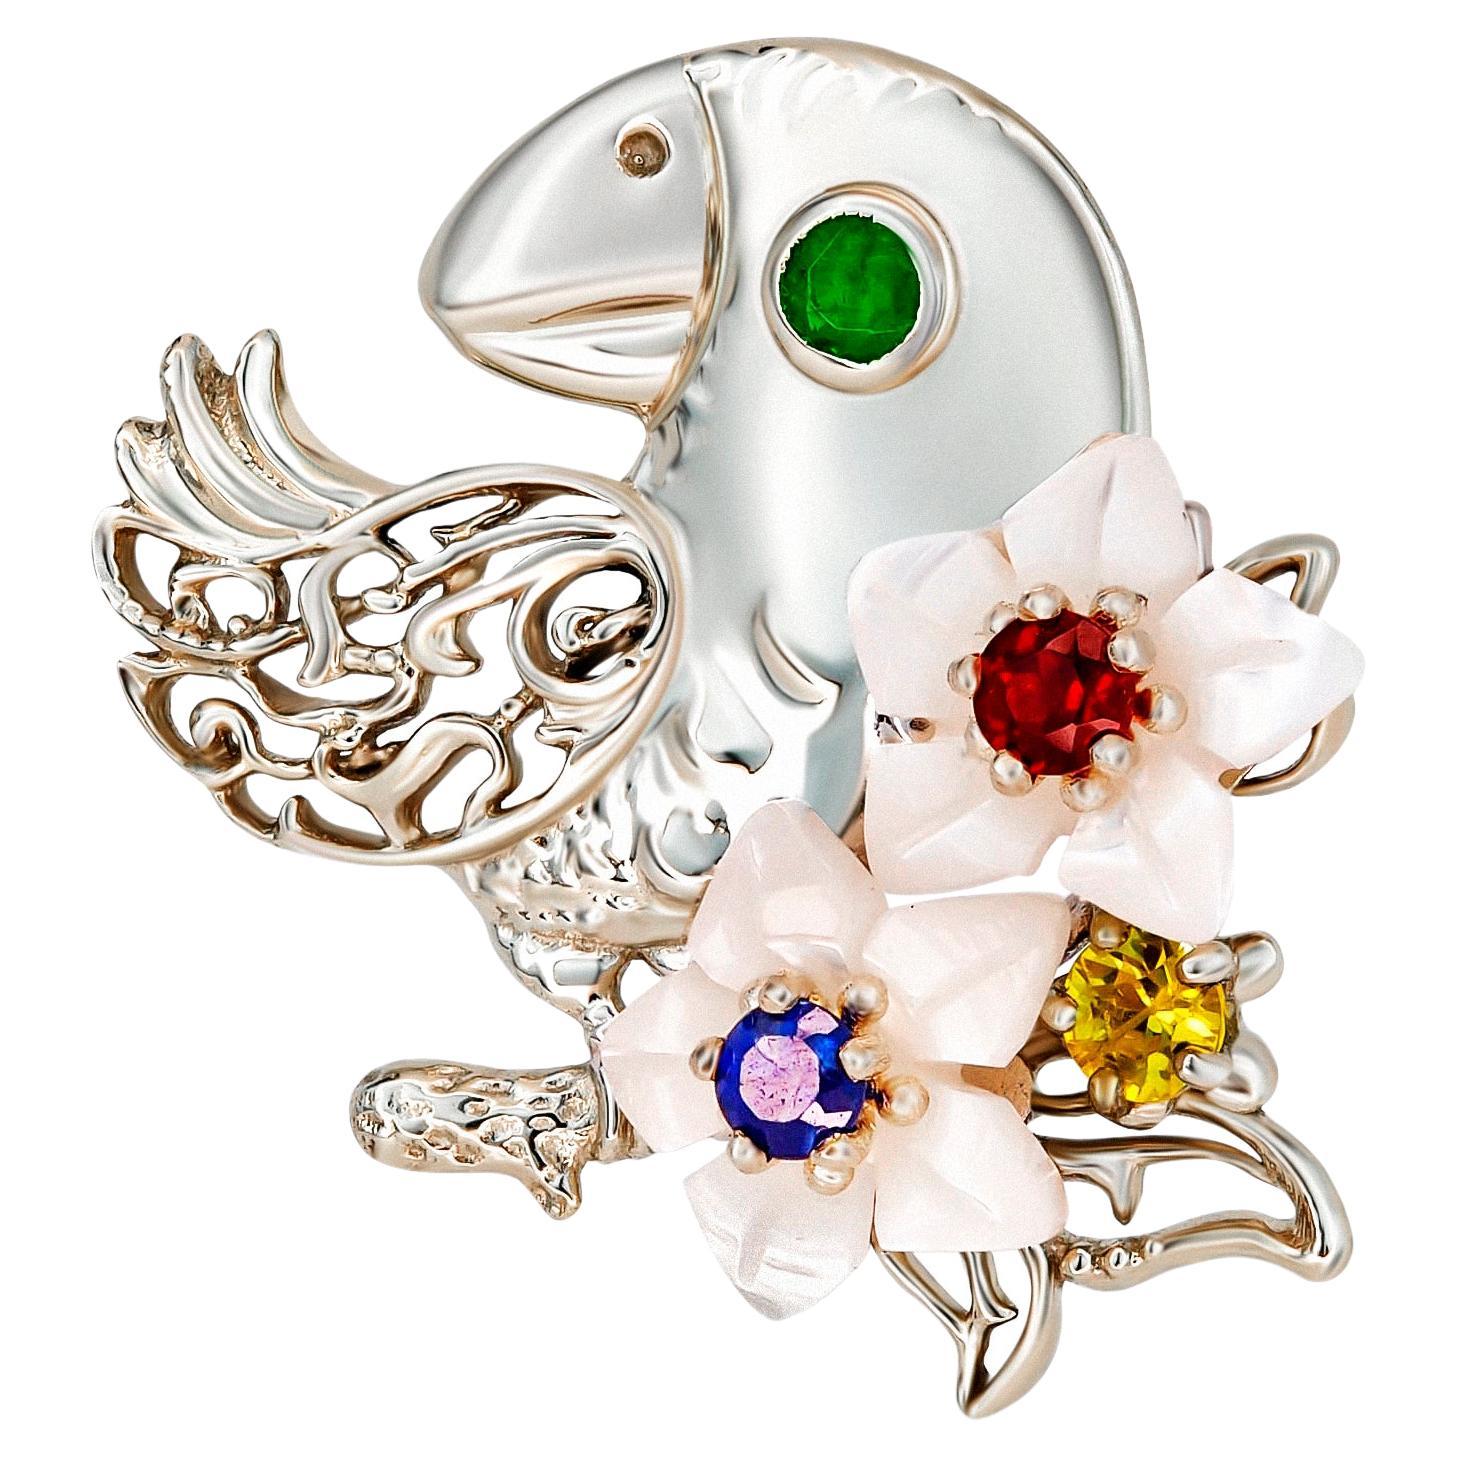 Parrot gold pendant with emerald, sapphires, ruby and pearl carved flowers!